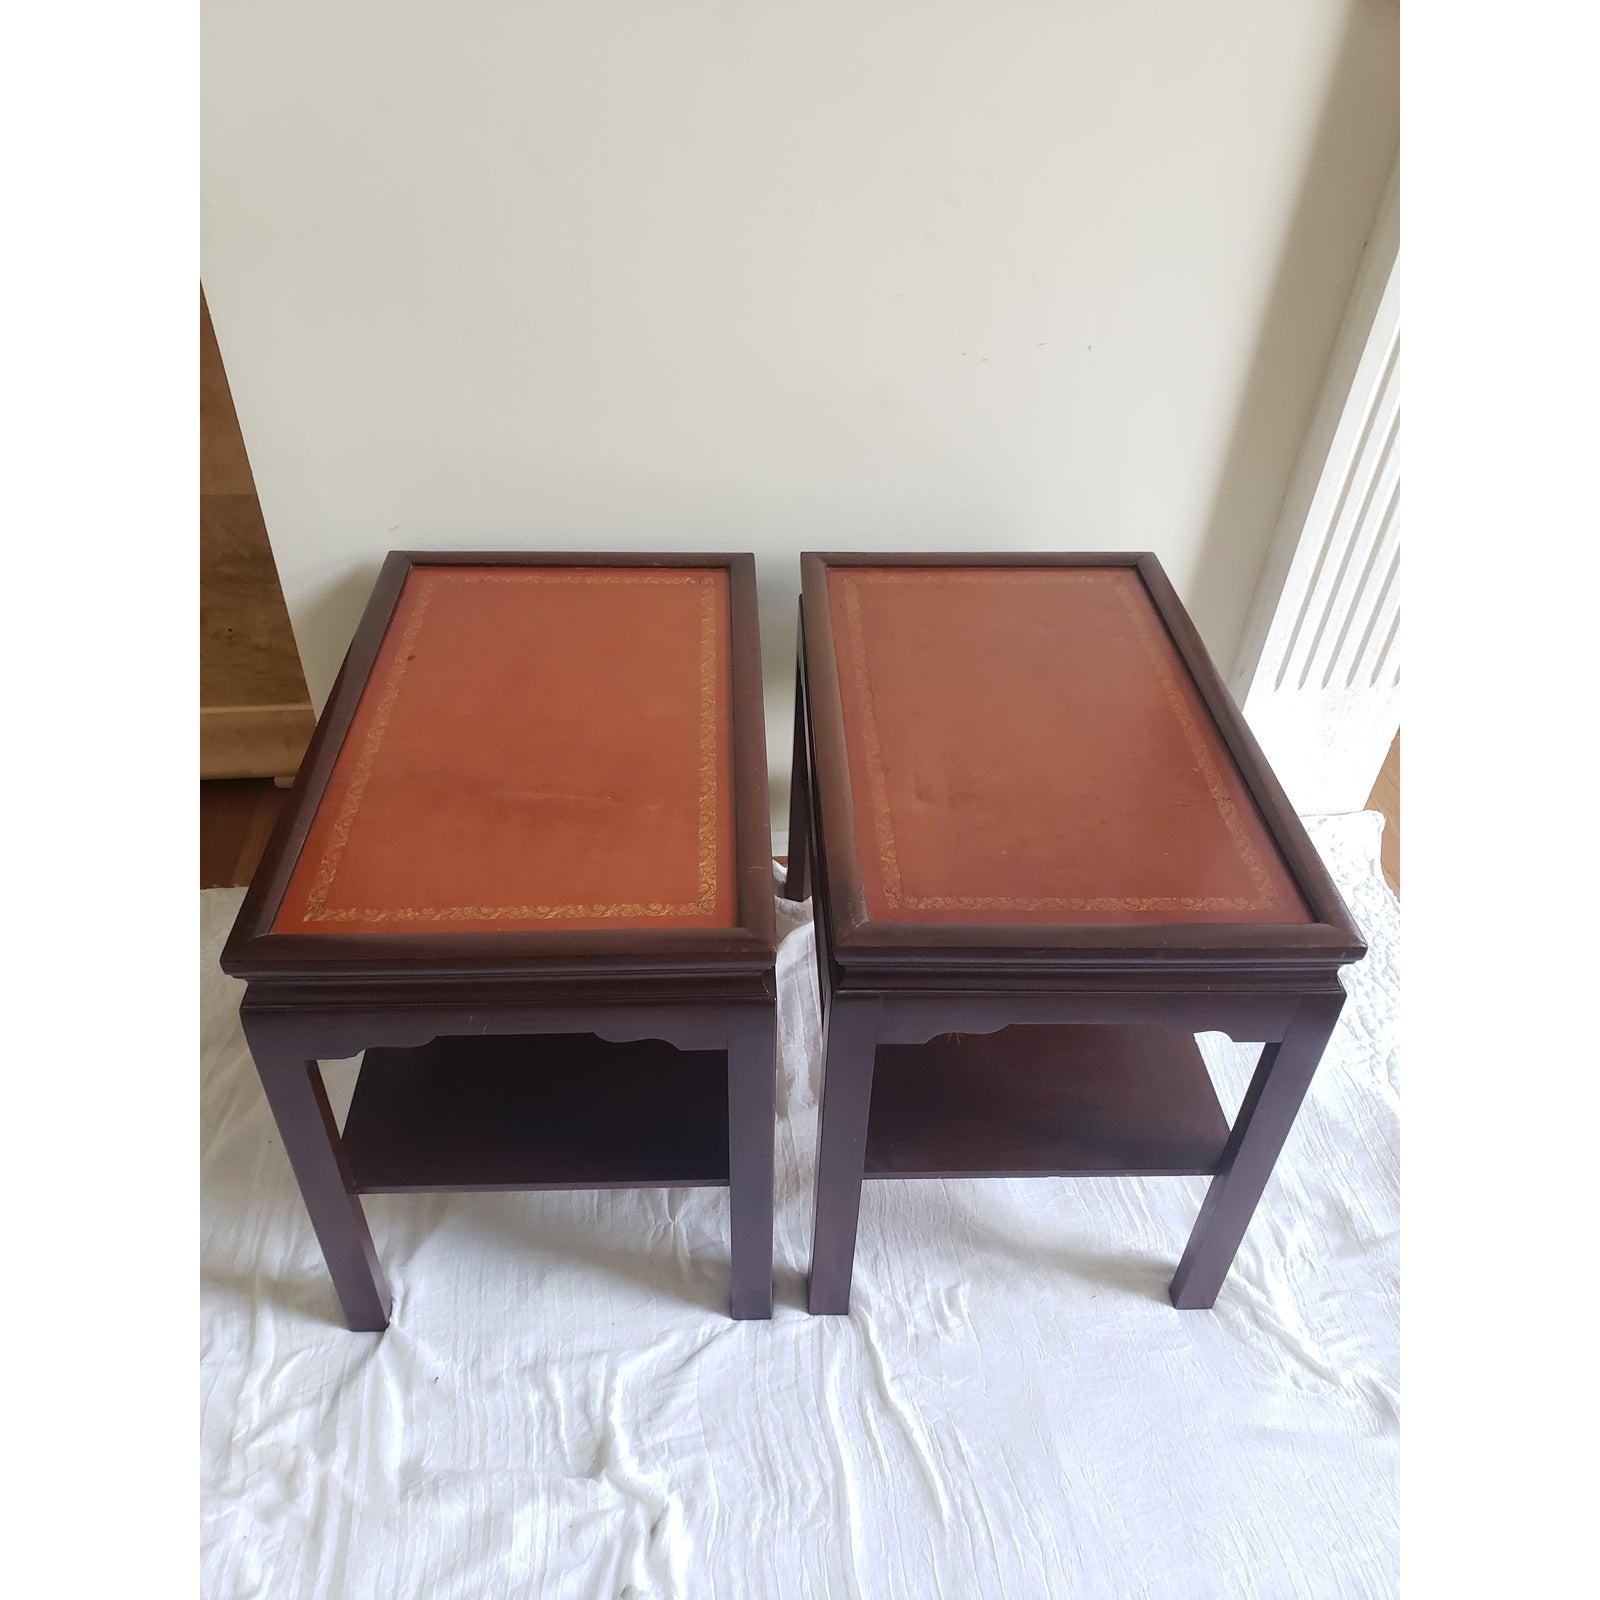 1940s Two-Tier Leather and Stinciling Top Side Tables, a Pair In Good Condition For Sale In Germantown, MD